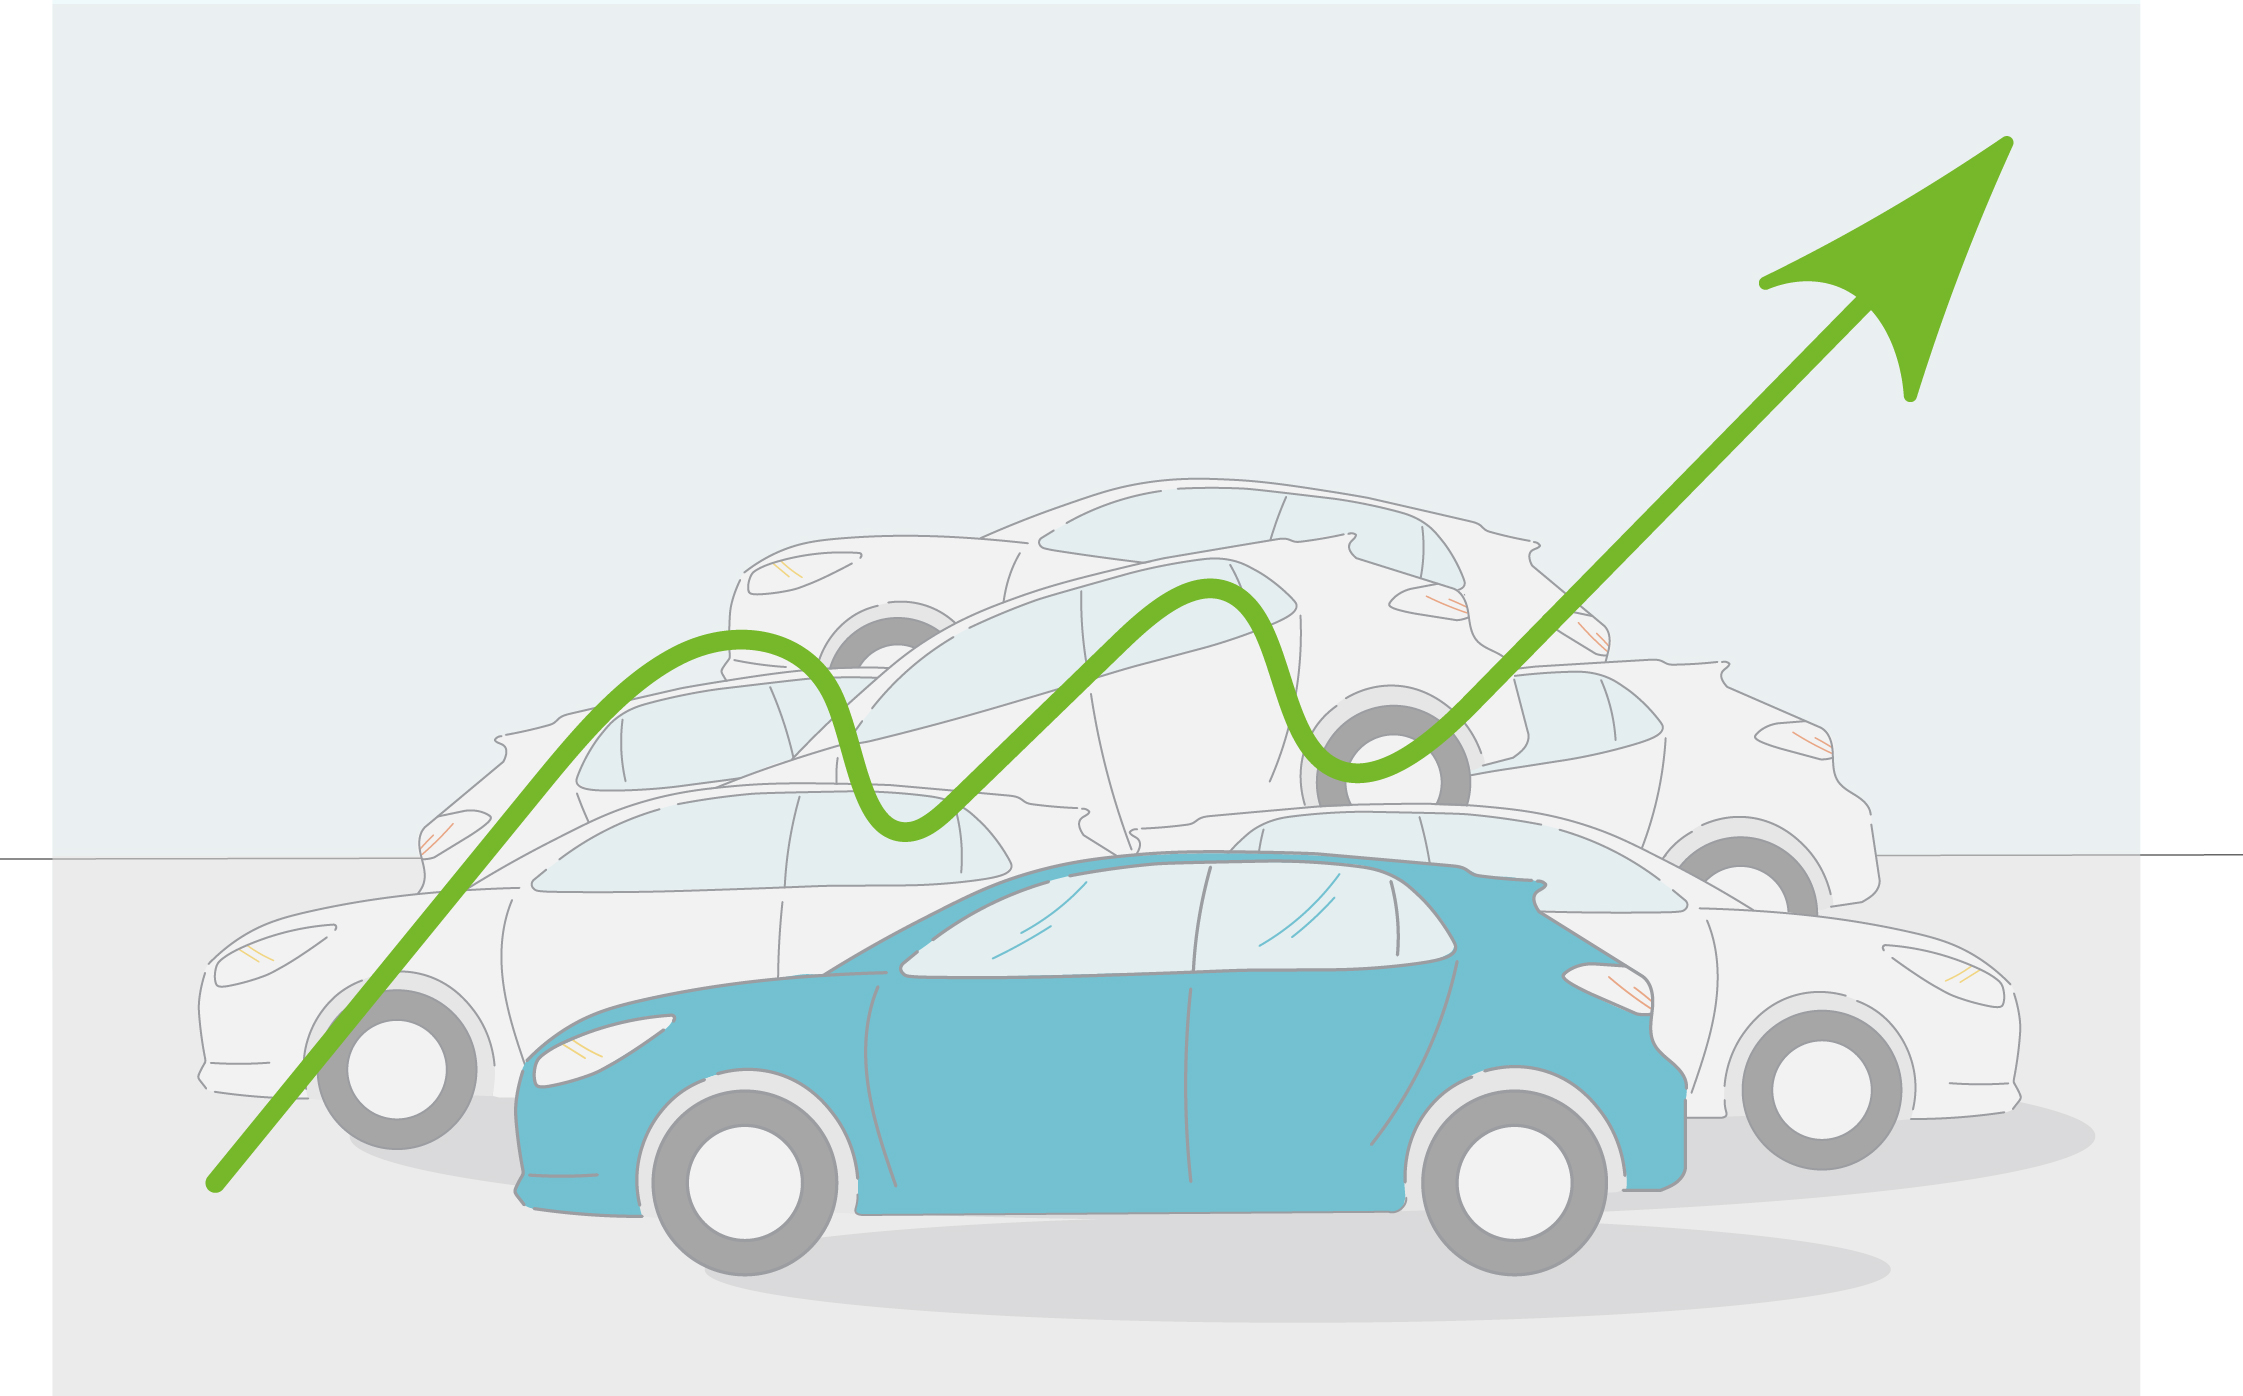 Illustration of cars with a chart line overlaid showing an increase